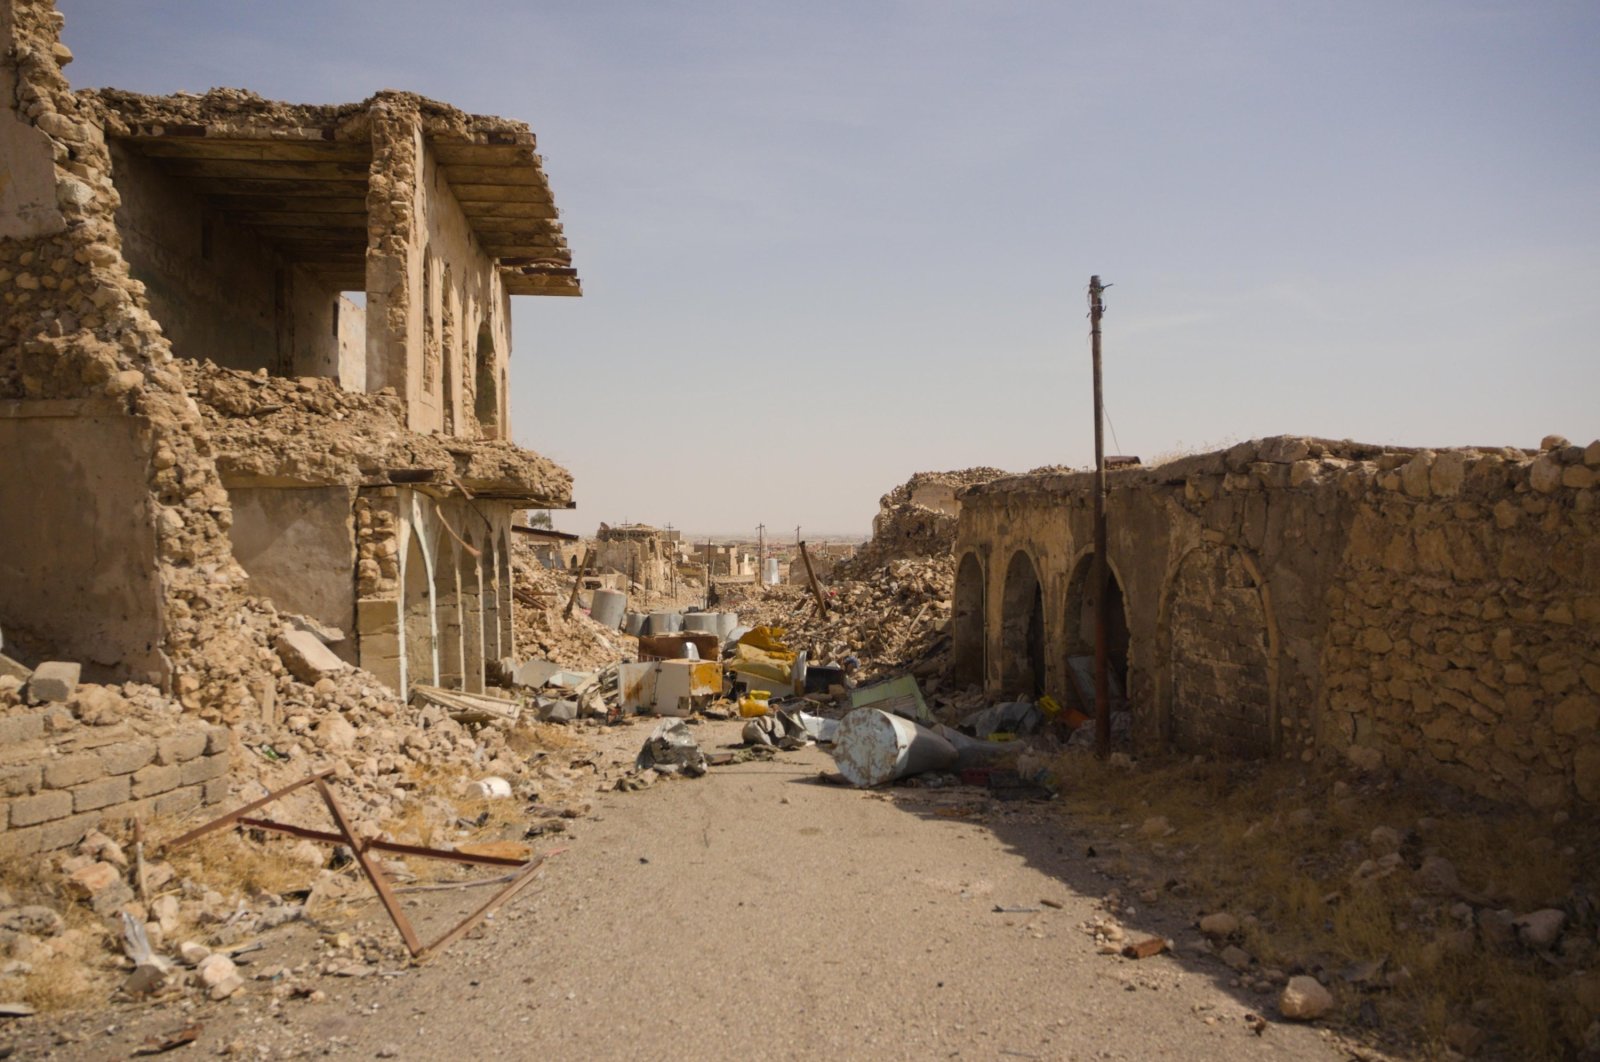 Streets destroyed in the fight against Daesh in northern Iraq's Sinjar are seen, Oct. 23, 2018. (Photo by Shutterstock)